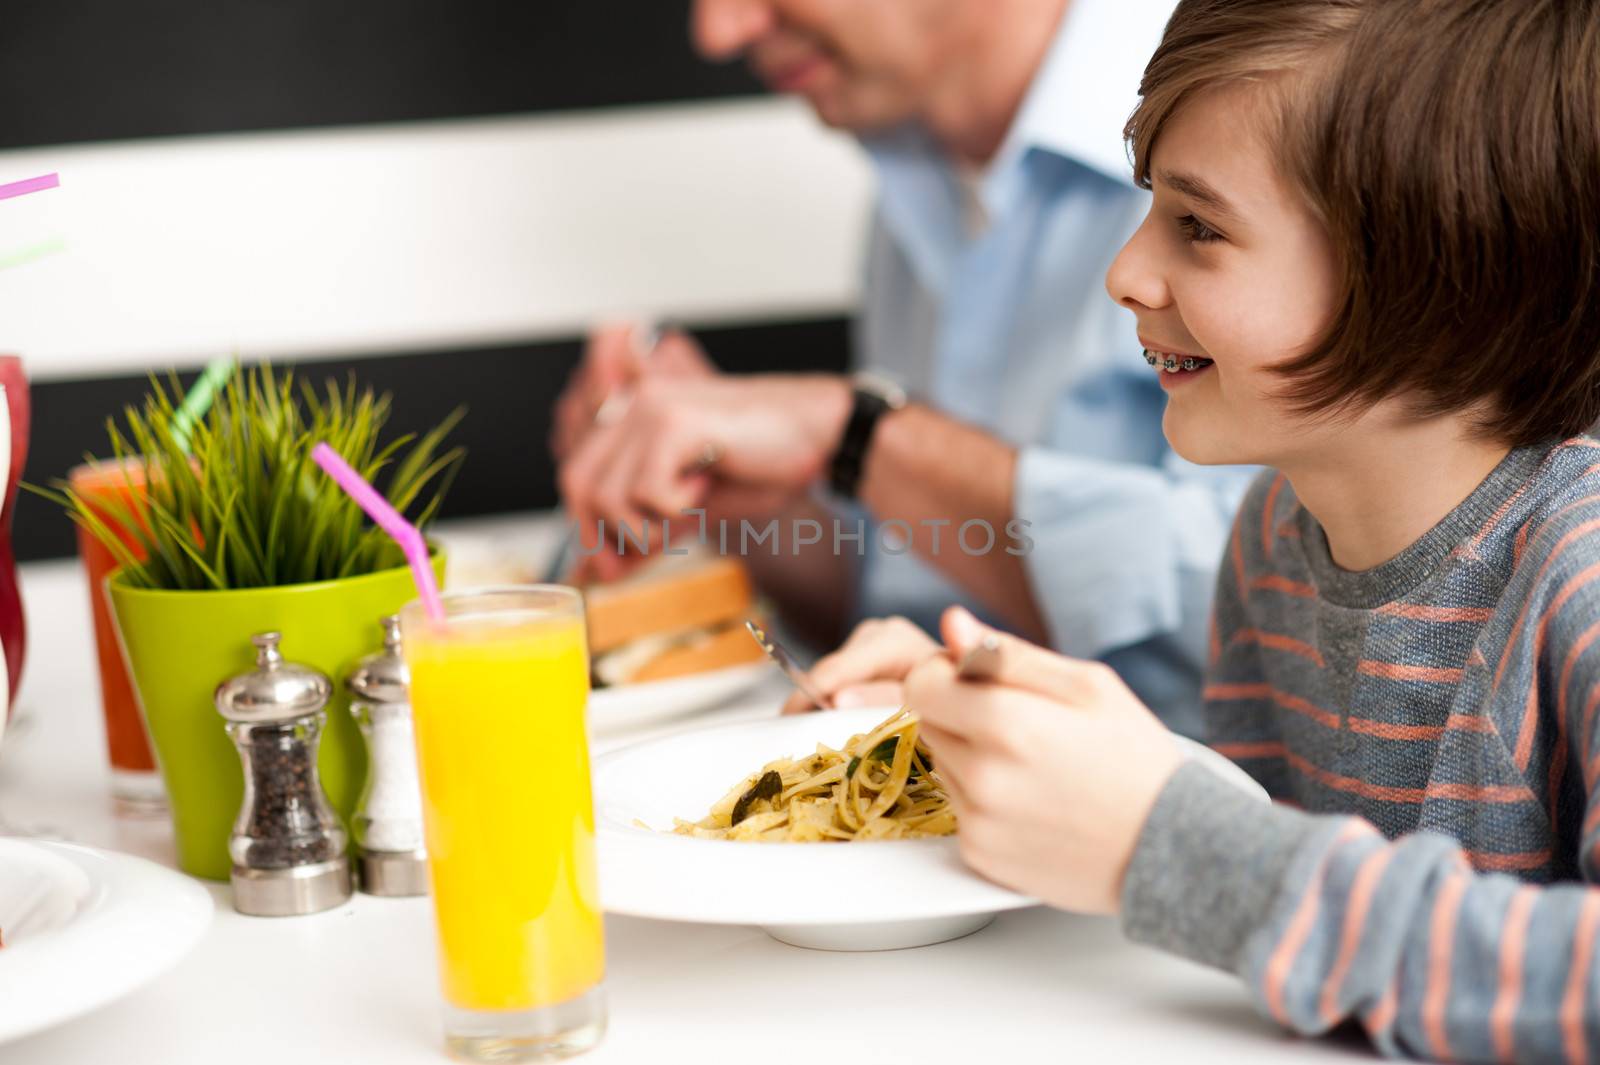 Cheerful son with his dad enjoying breakfast at restaurant.